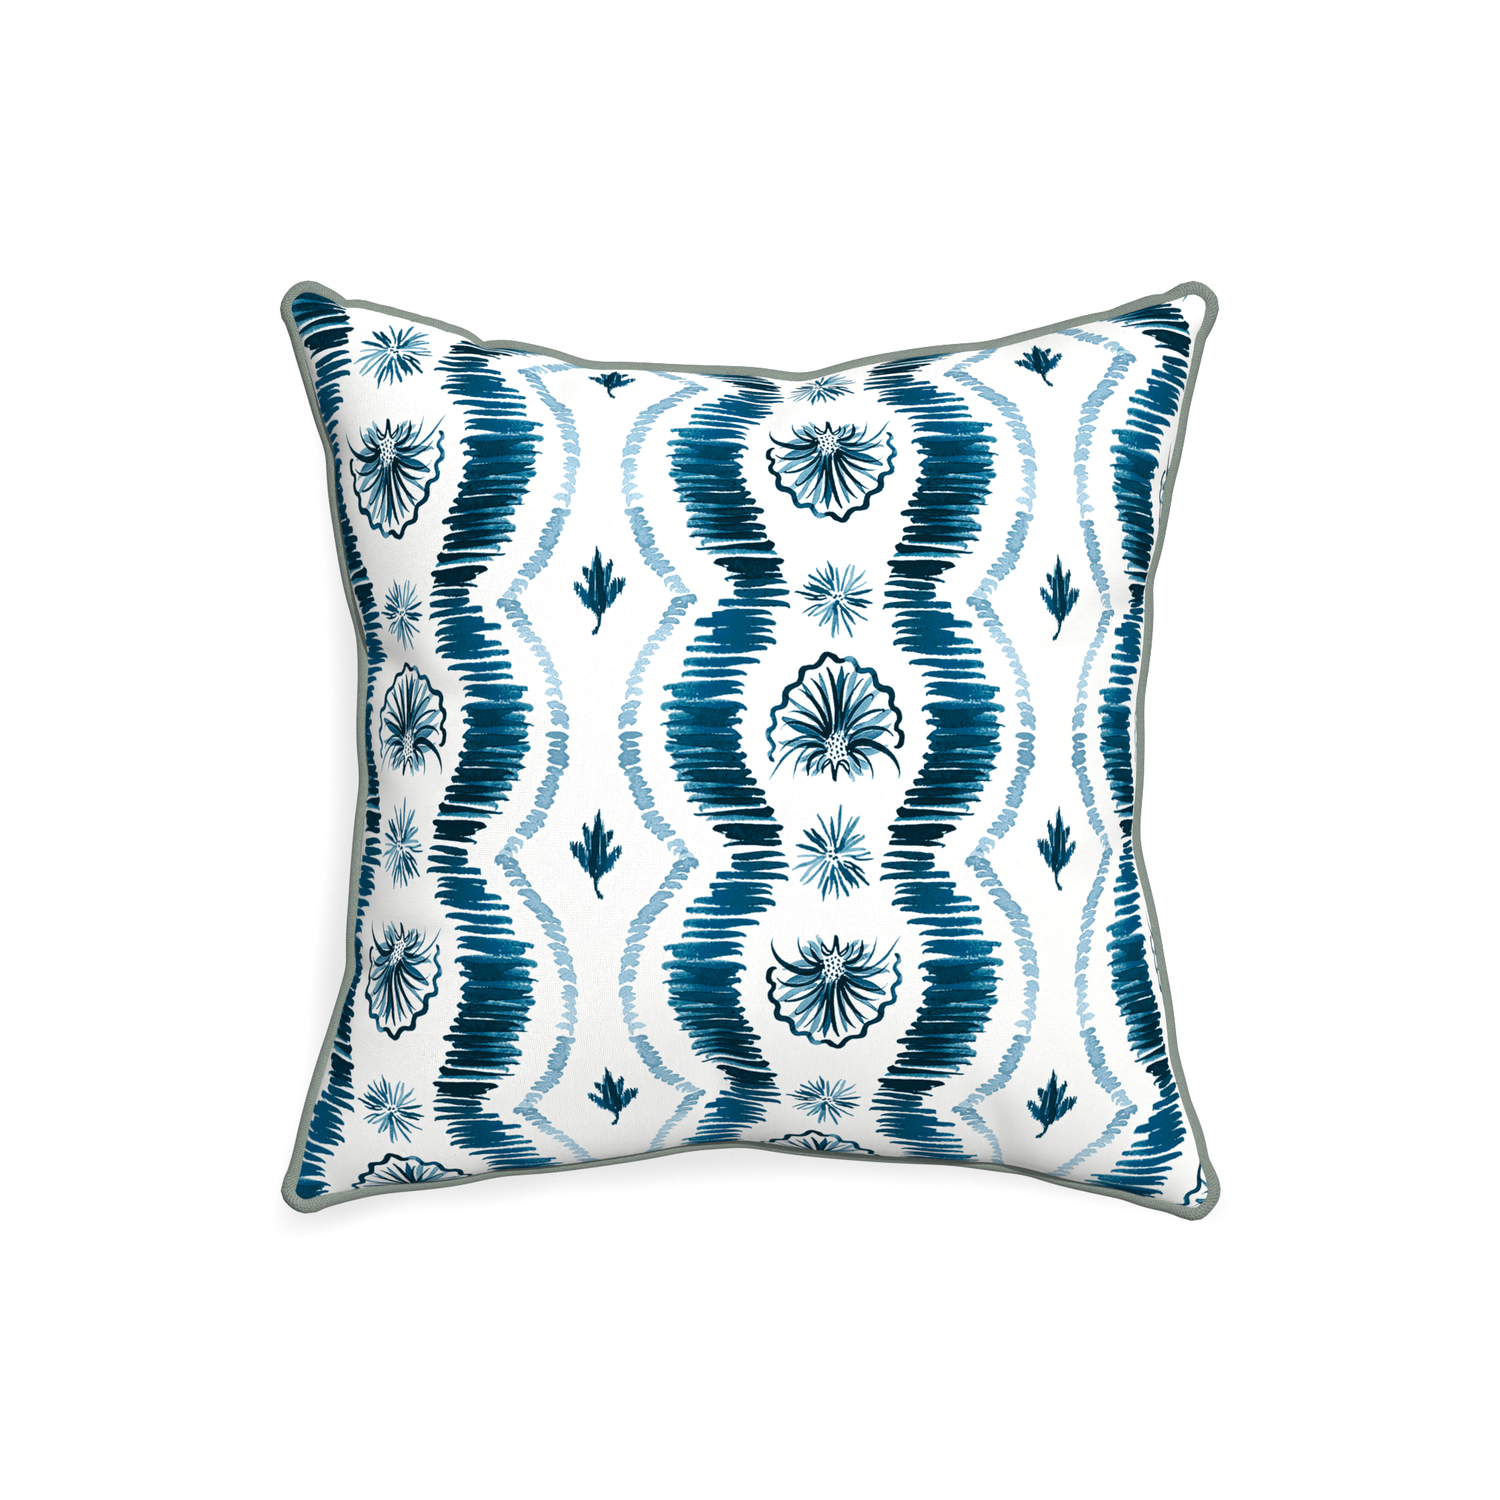 20-square alice custom blue ikatpillow with sage piping on white background